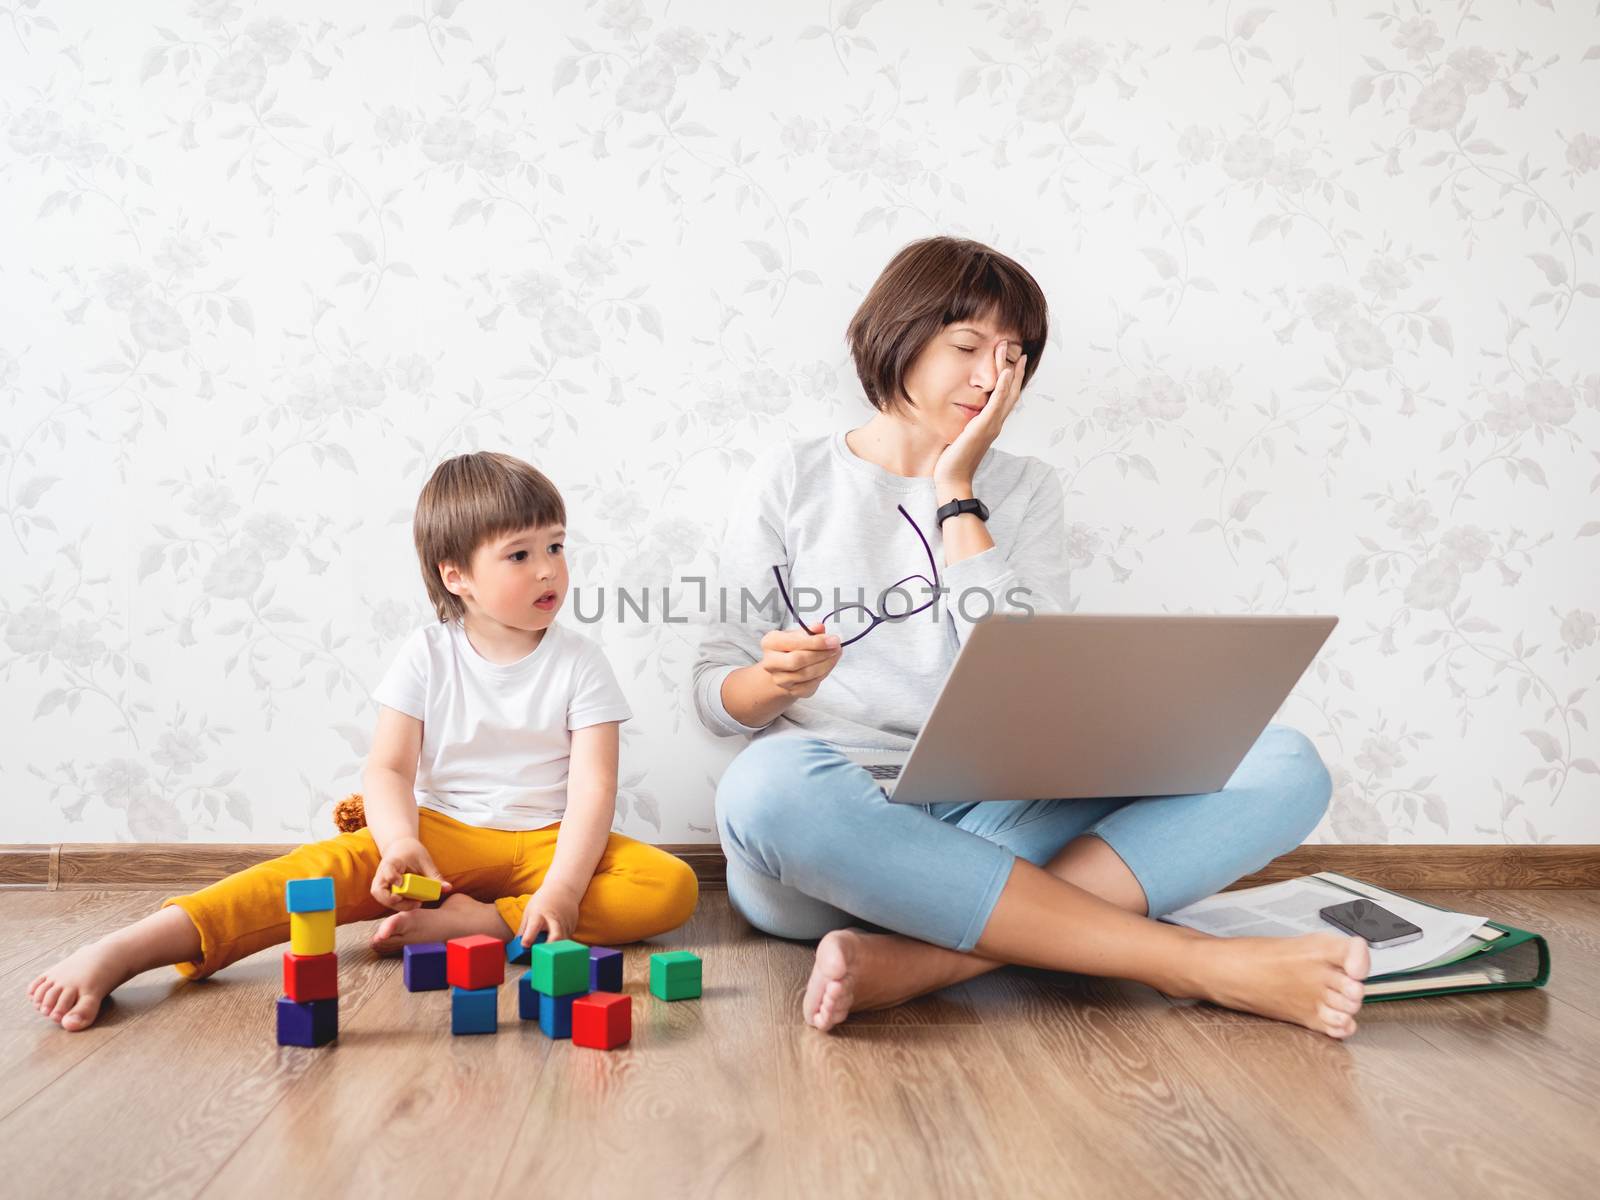 Mom and son argue at home quarantine because of coronavirus COVID19. Tired mother works remotely with laptop, son plays with toy blocks. Self isolation at home.